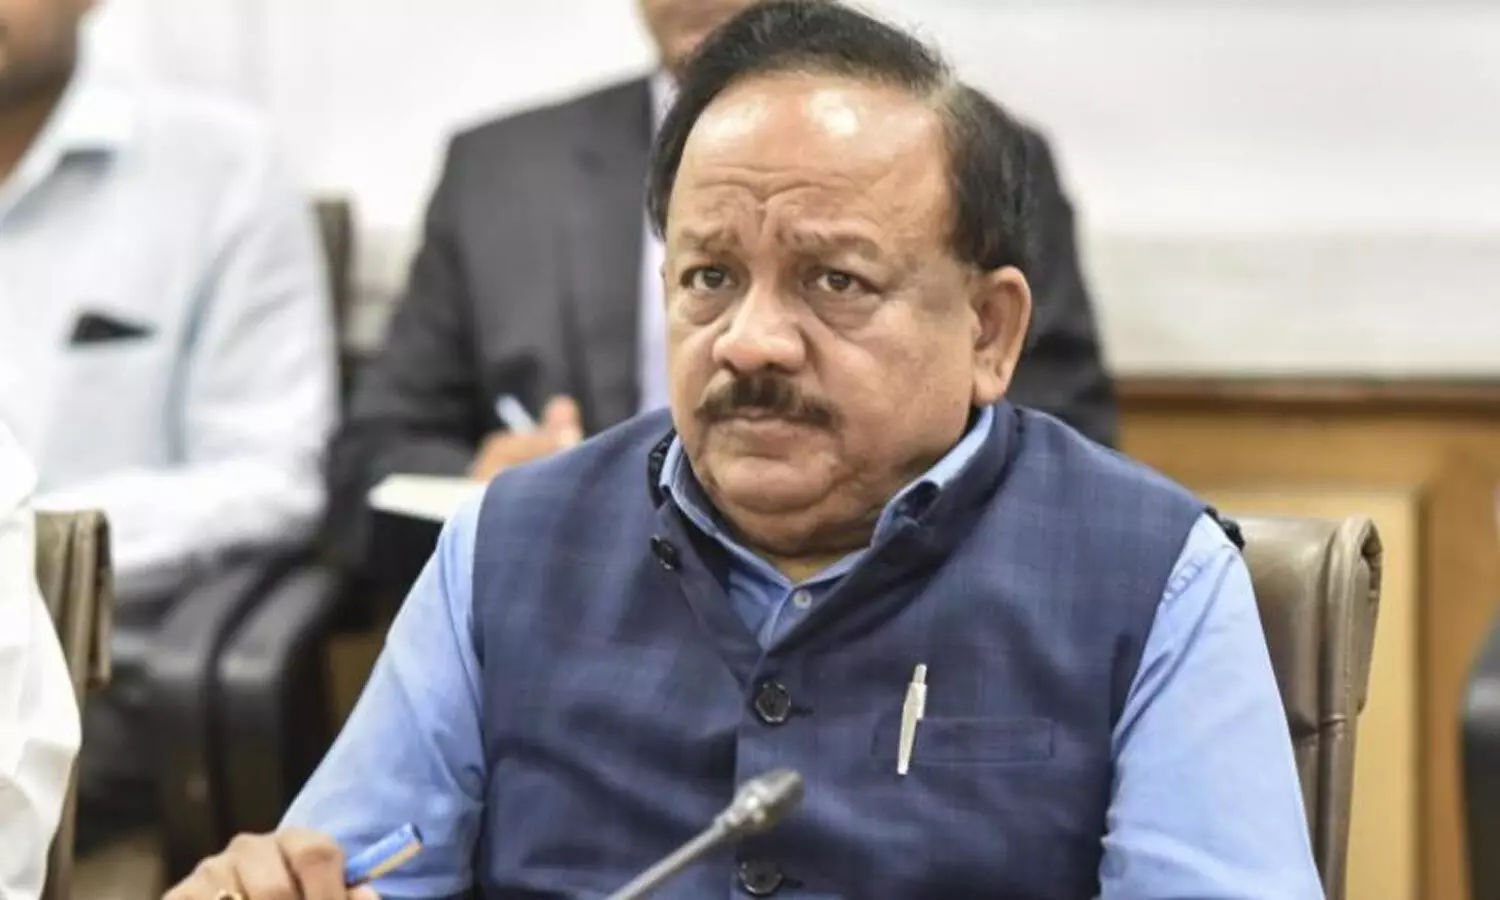 AYUSH Ministry received 154 misleading ads on COVID-19 treatment claims: Dr Harsh Vardhan